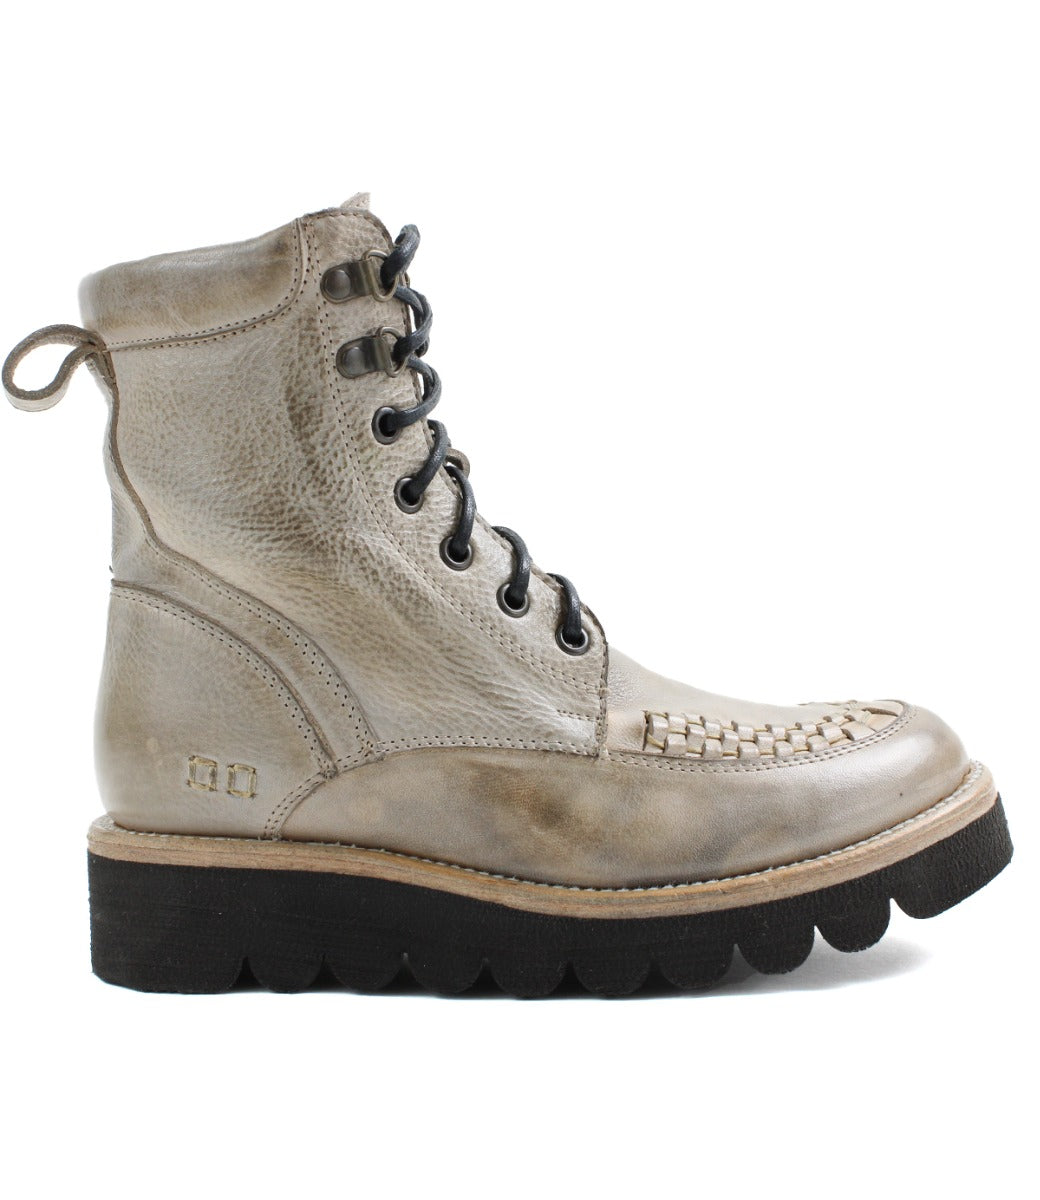 A women's ankle boot in beige with black soles called Elisha II by Bed Stu.